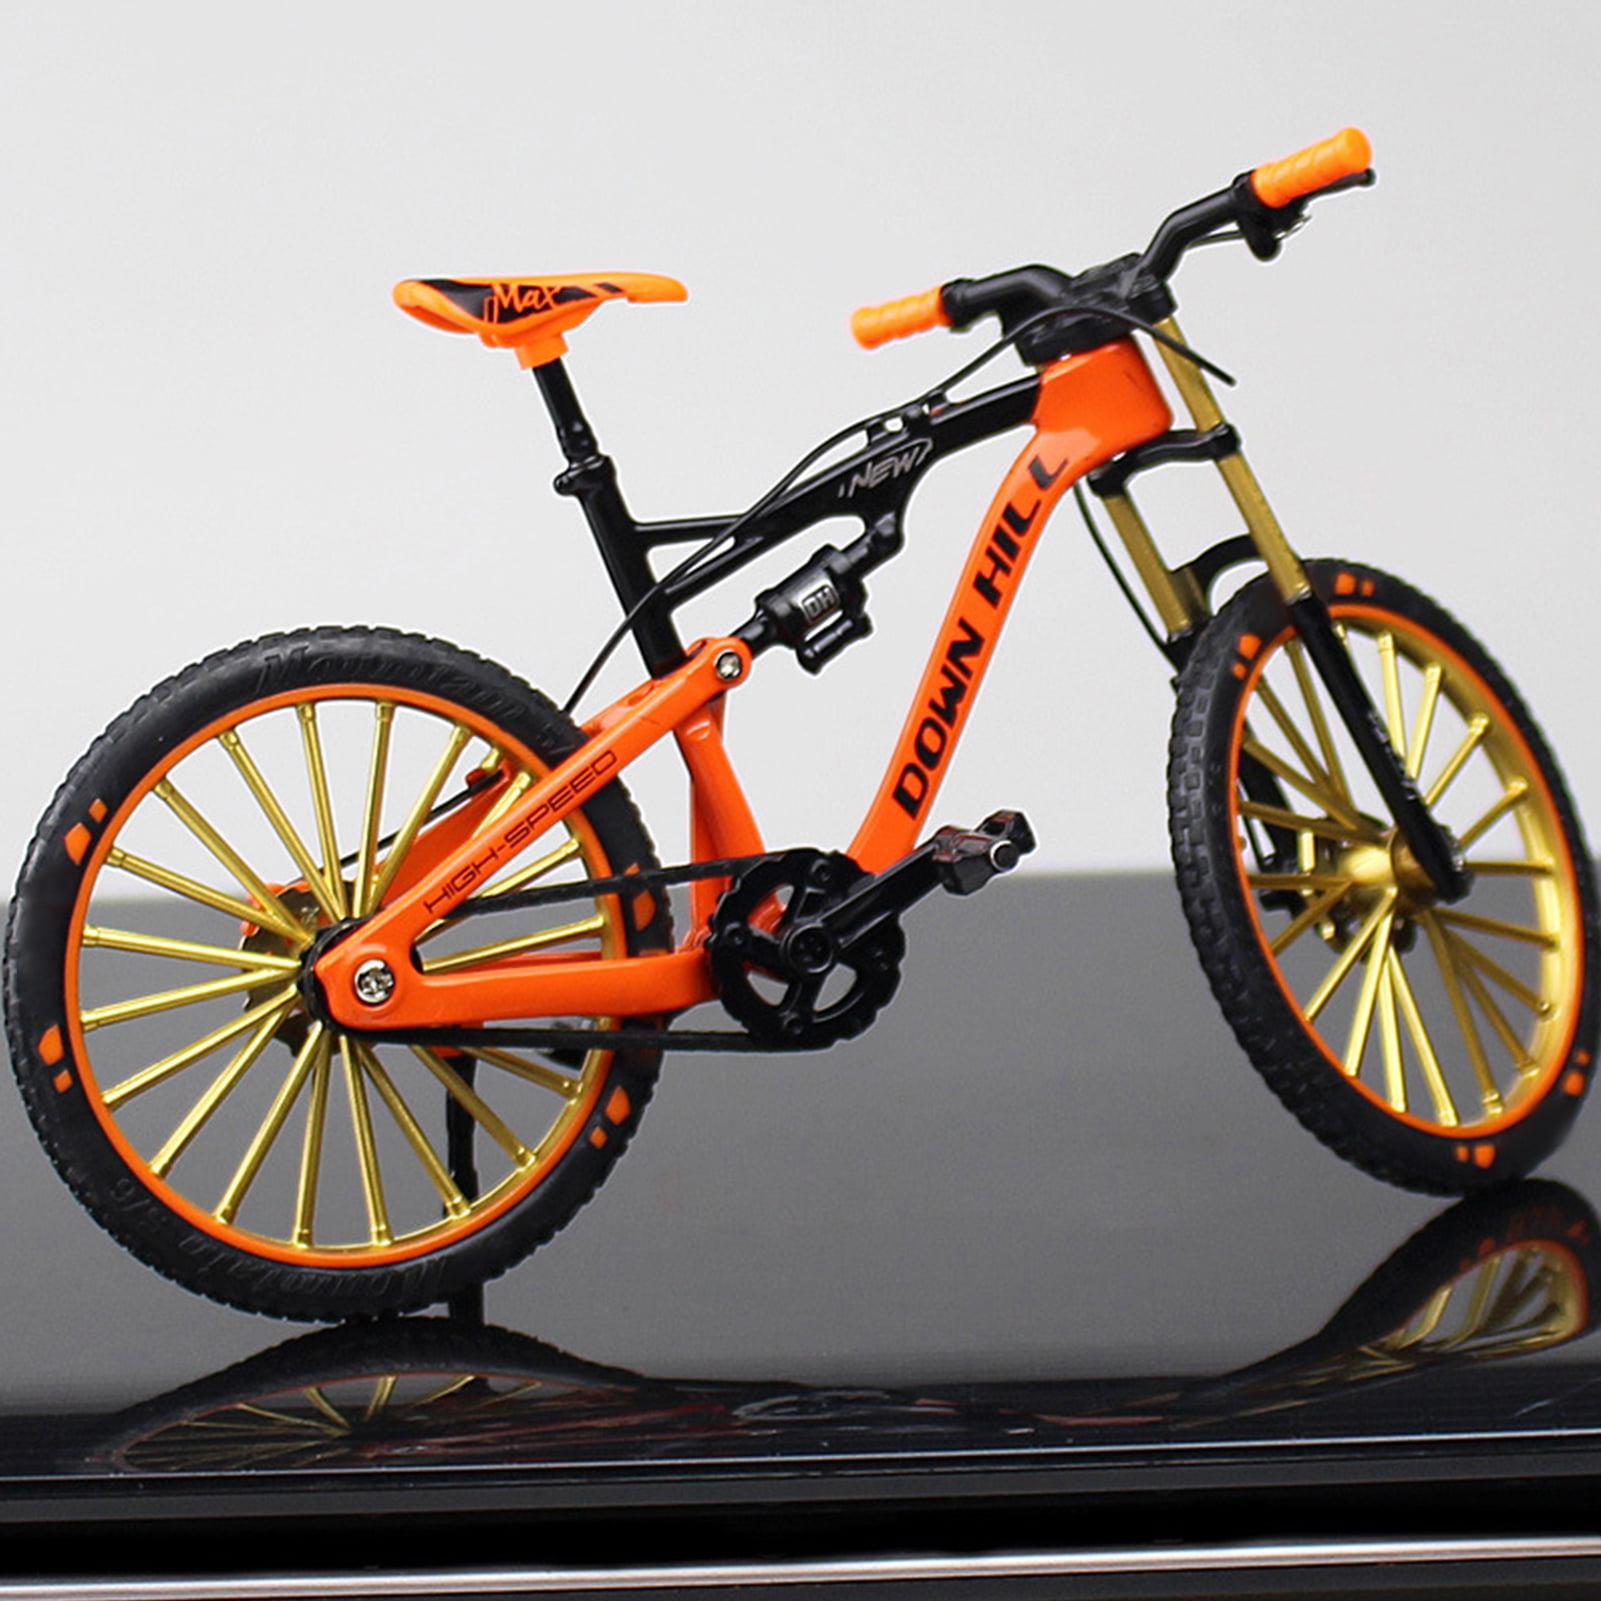 Mini Bicycle Vehicles Model Crafts for Home Decoration Rotatable Pedals Rotatable Front Head 1:10 Finger Mountain Bike Toy Lifelike Eco-Friendly Resistant to Dropping Alloy Bicycle Model 